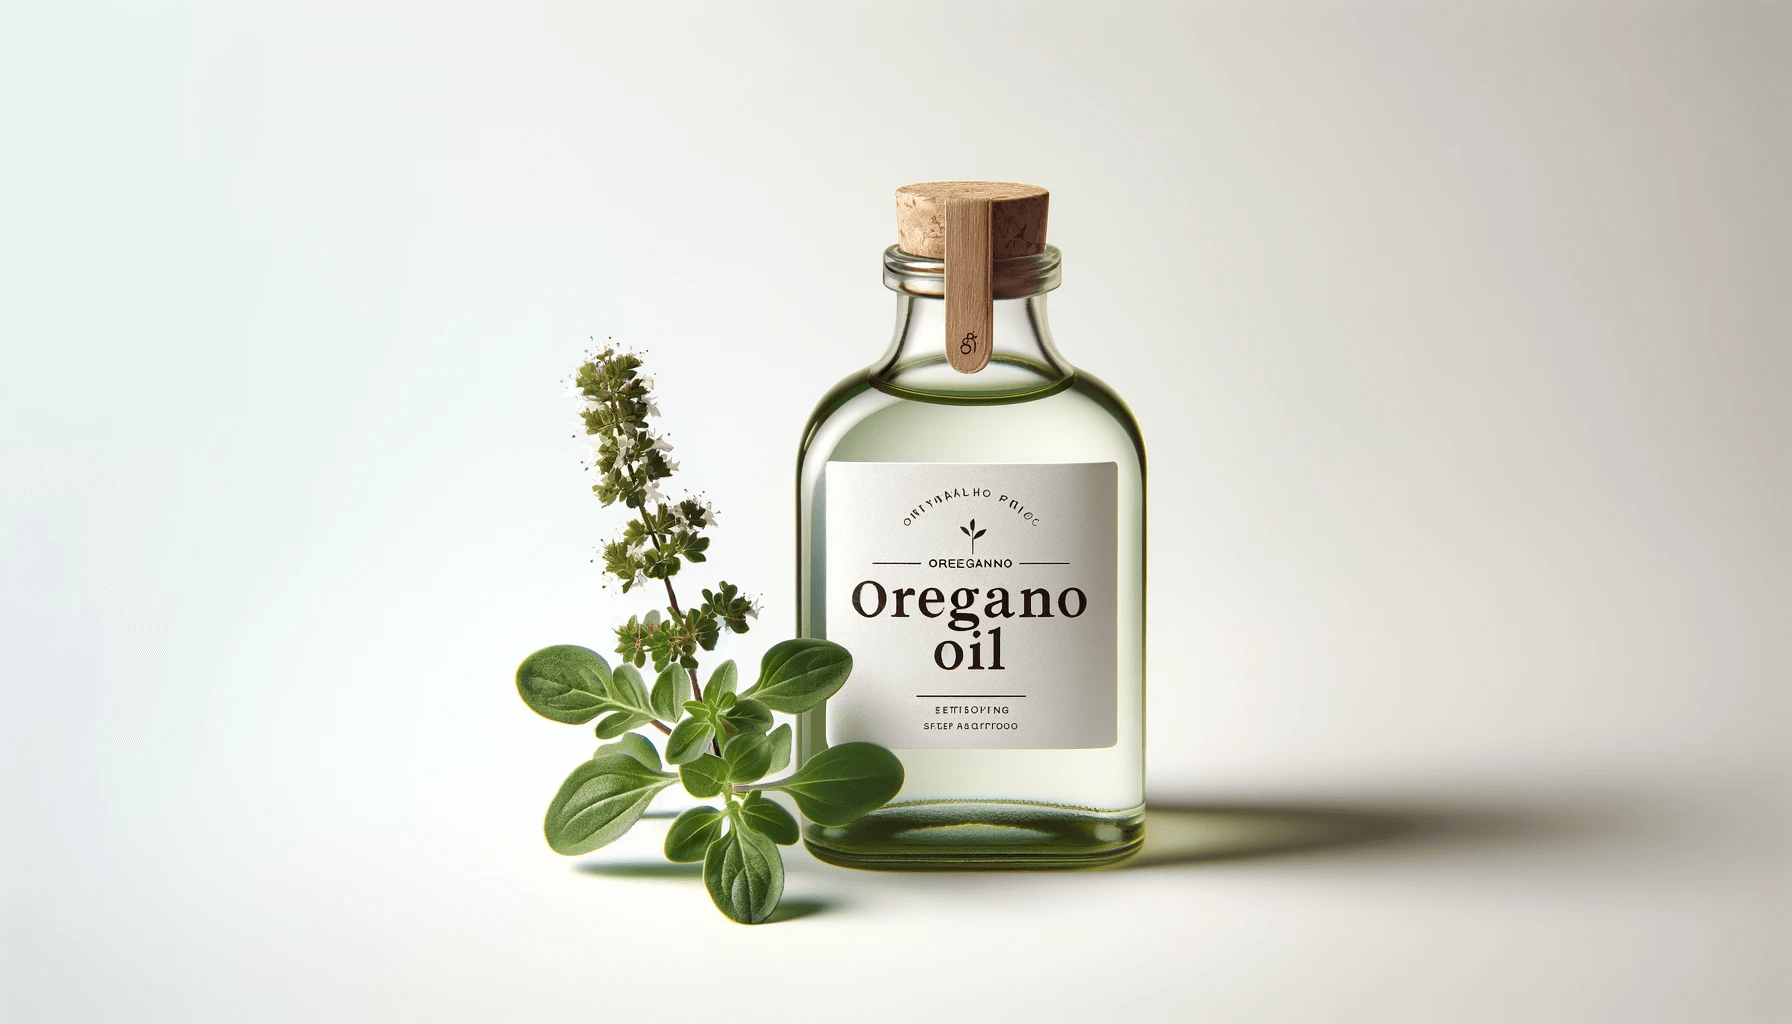 Oregano oil bottle with a sprig of oregano tucked behind it, blending modern design with natural elements.